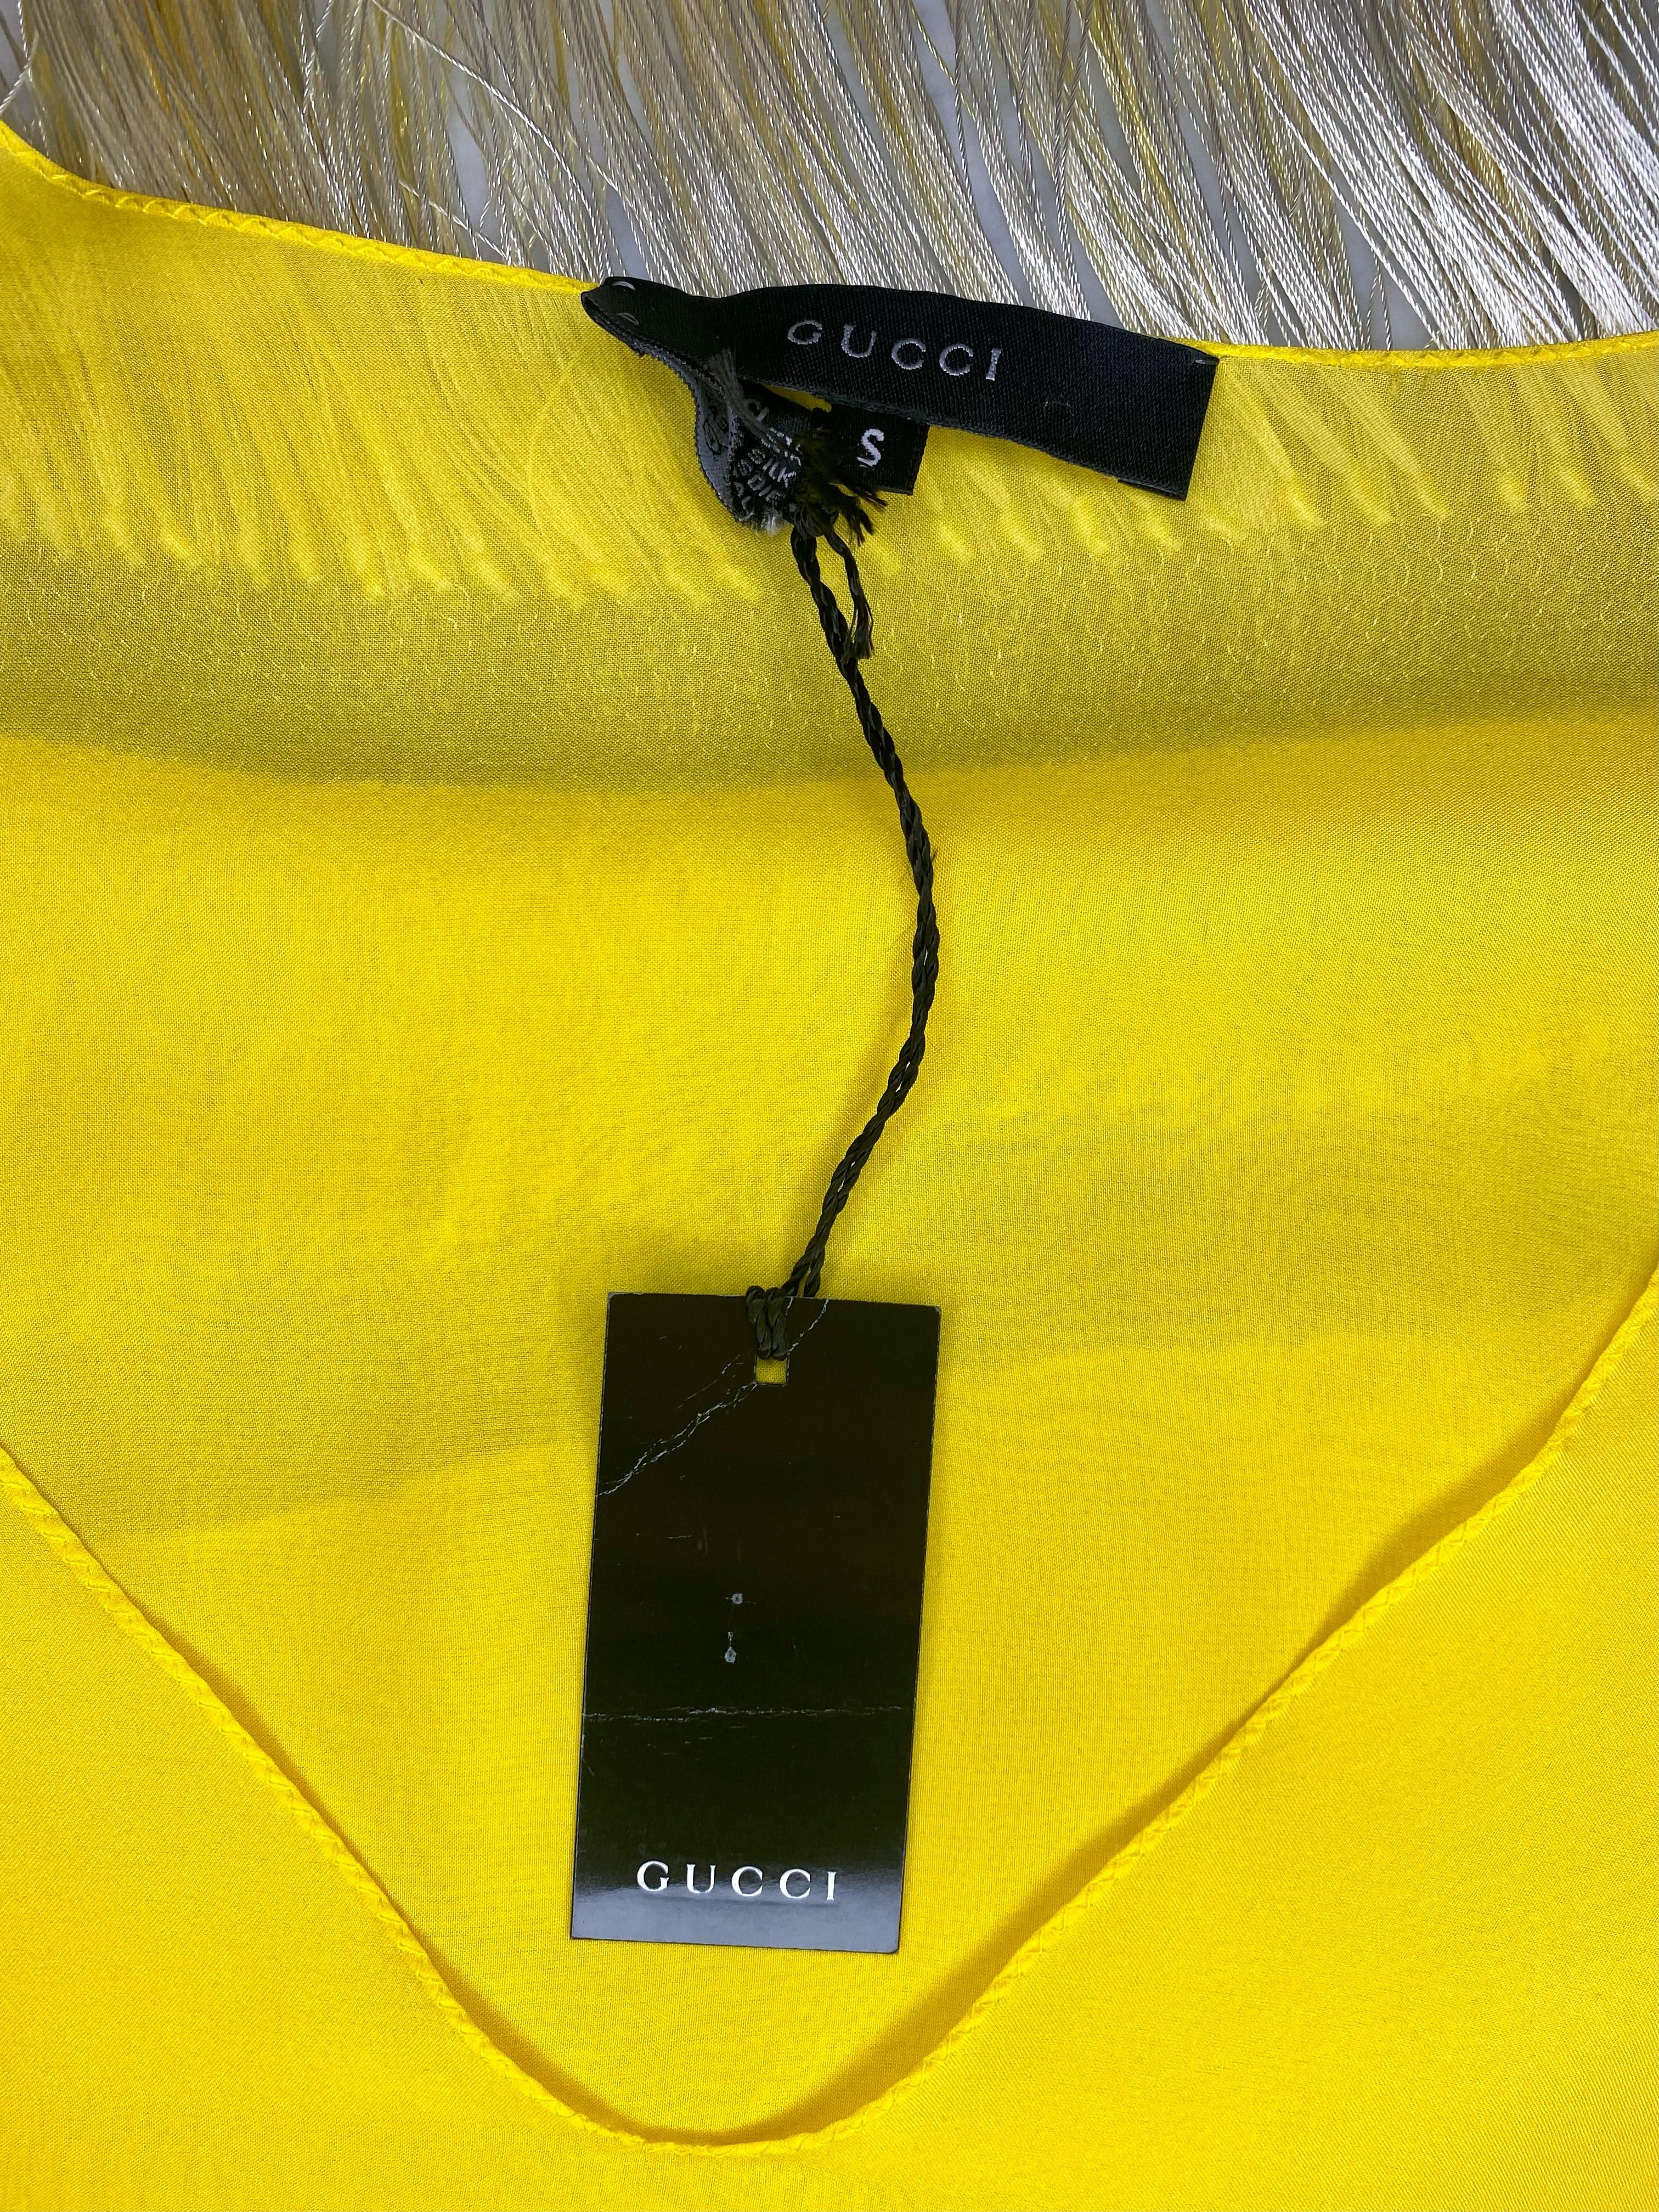 S/S 2004 Gucci by Tom Ford Chain Link Yellow Ombré Fringe Kaftan Cover Up NWT For Sale 6